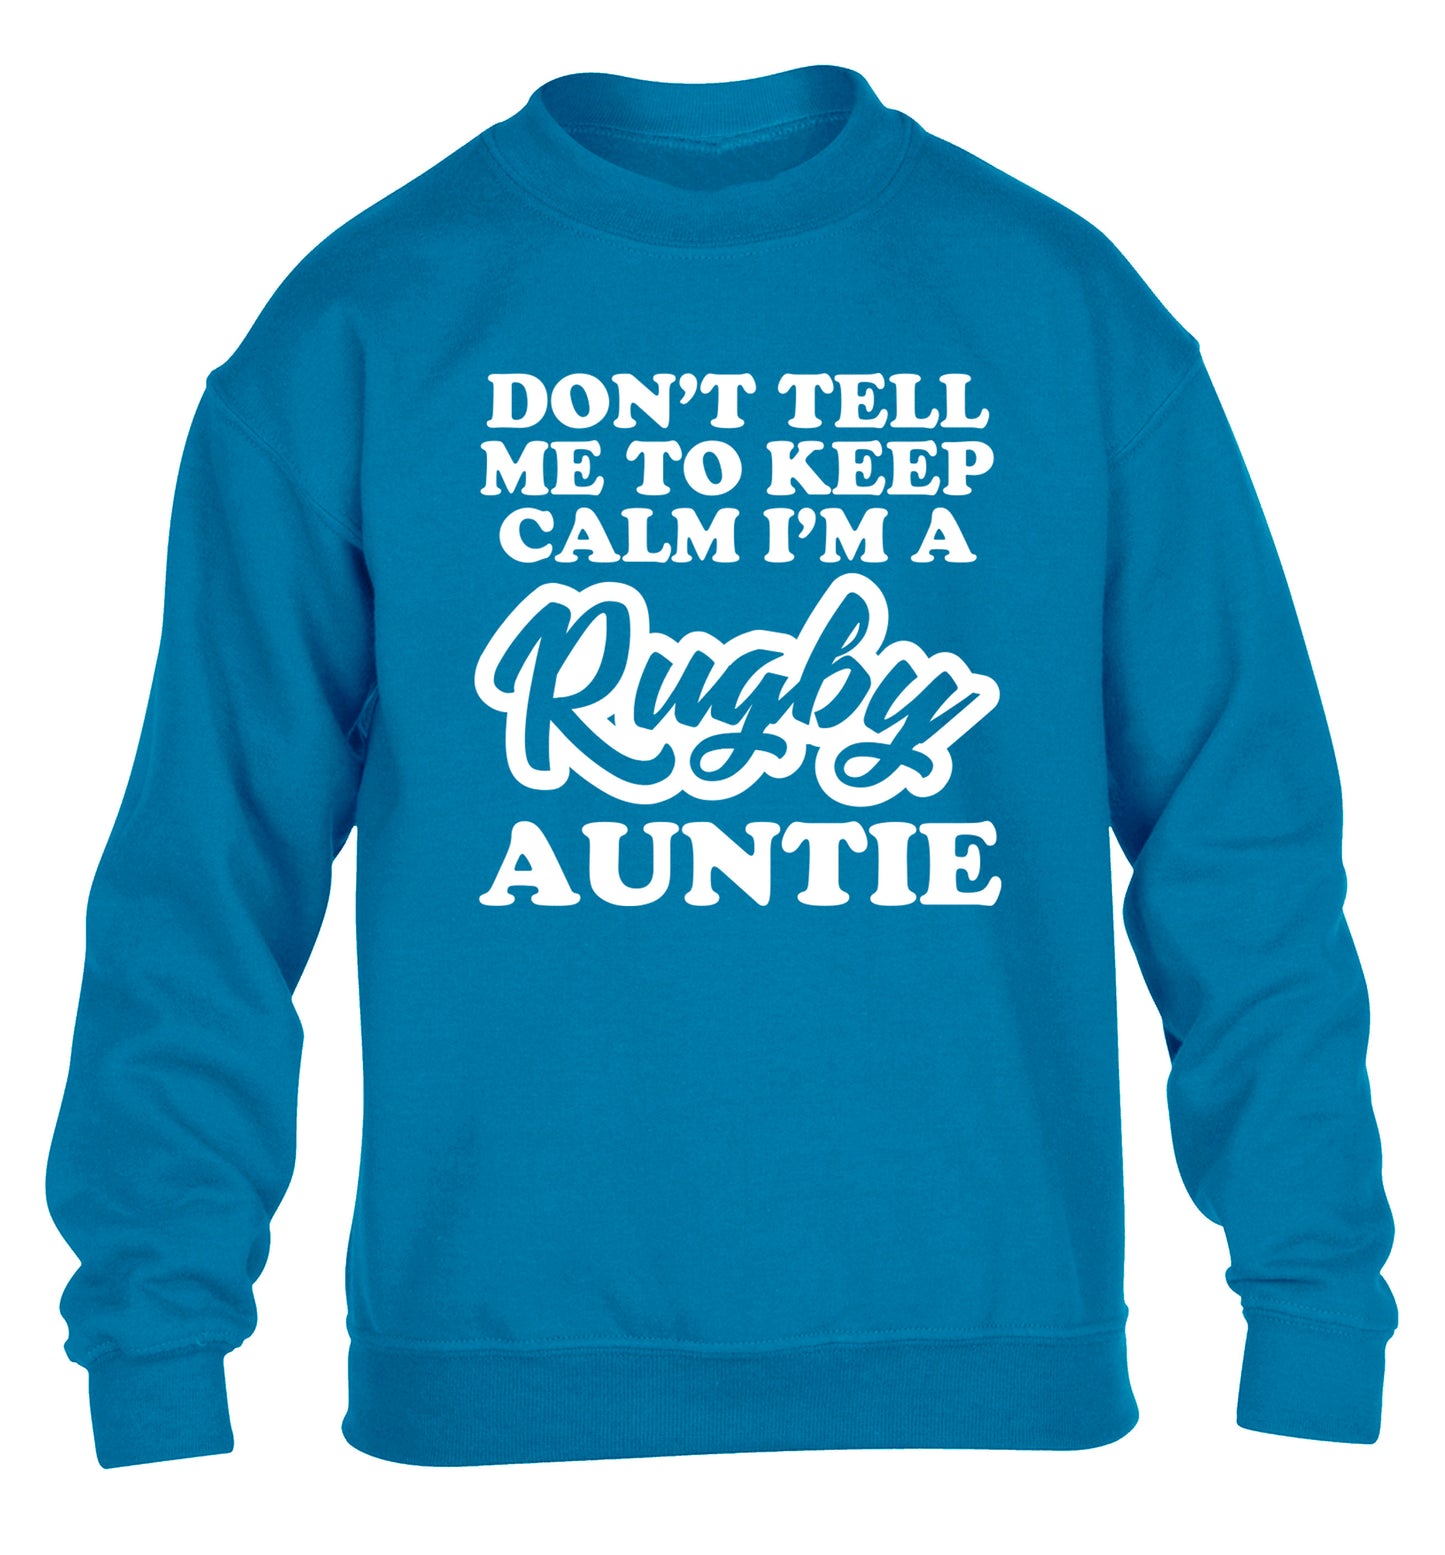 Don't tell me keep calm I'm a rugby auntie children's blue sweater 12-13 Years